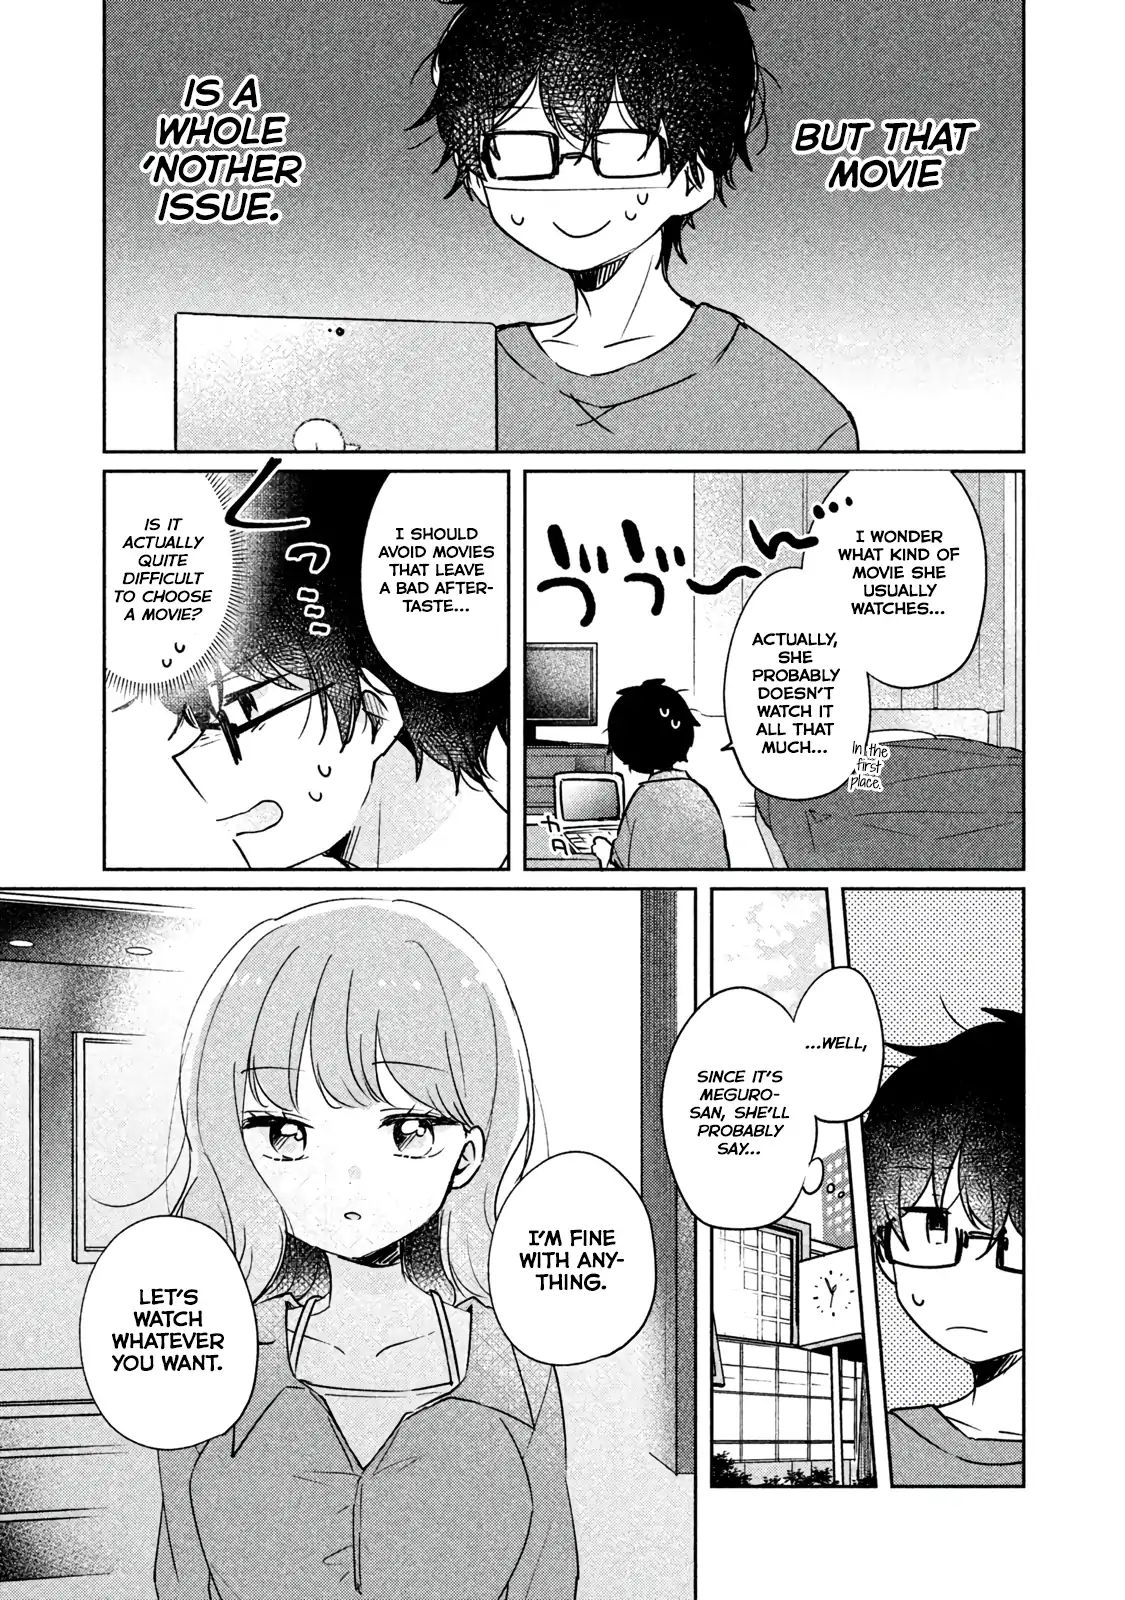 It's Not Meguro-san's First Time chapter 8 page 3